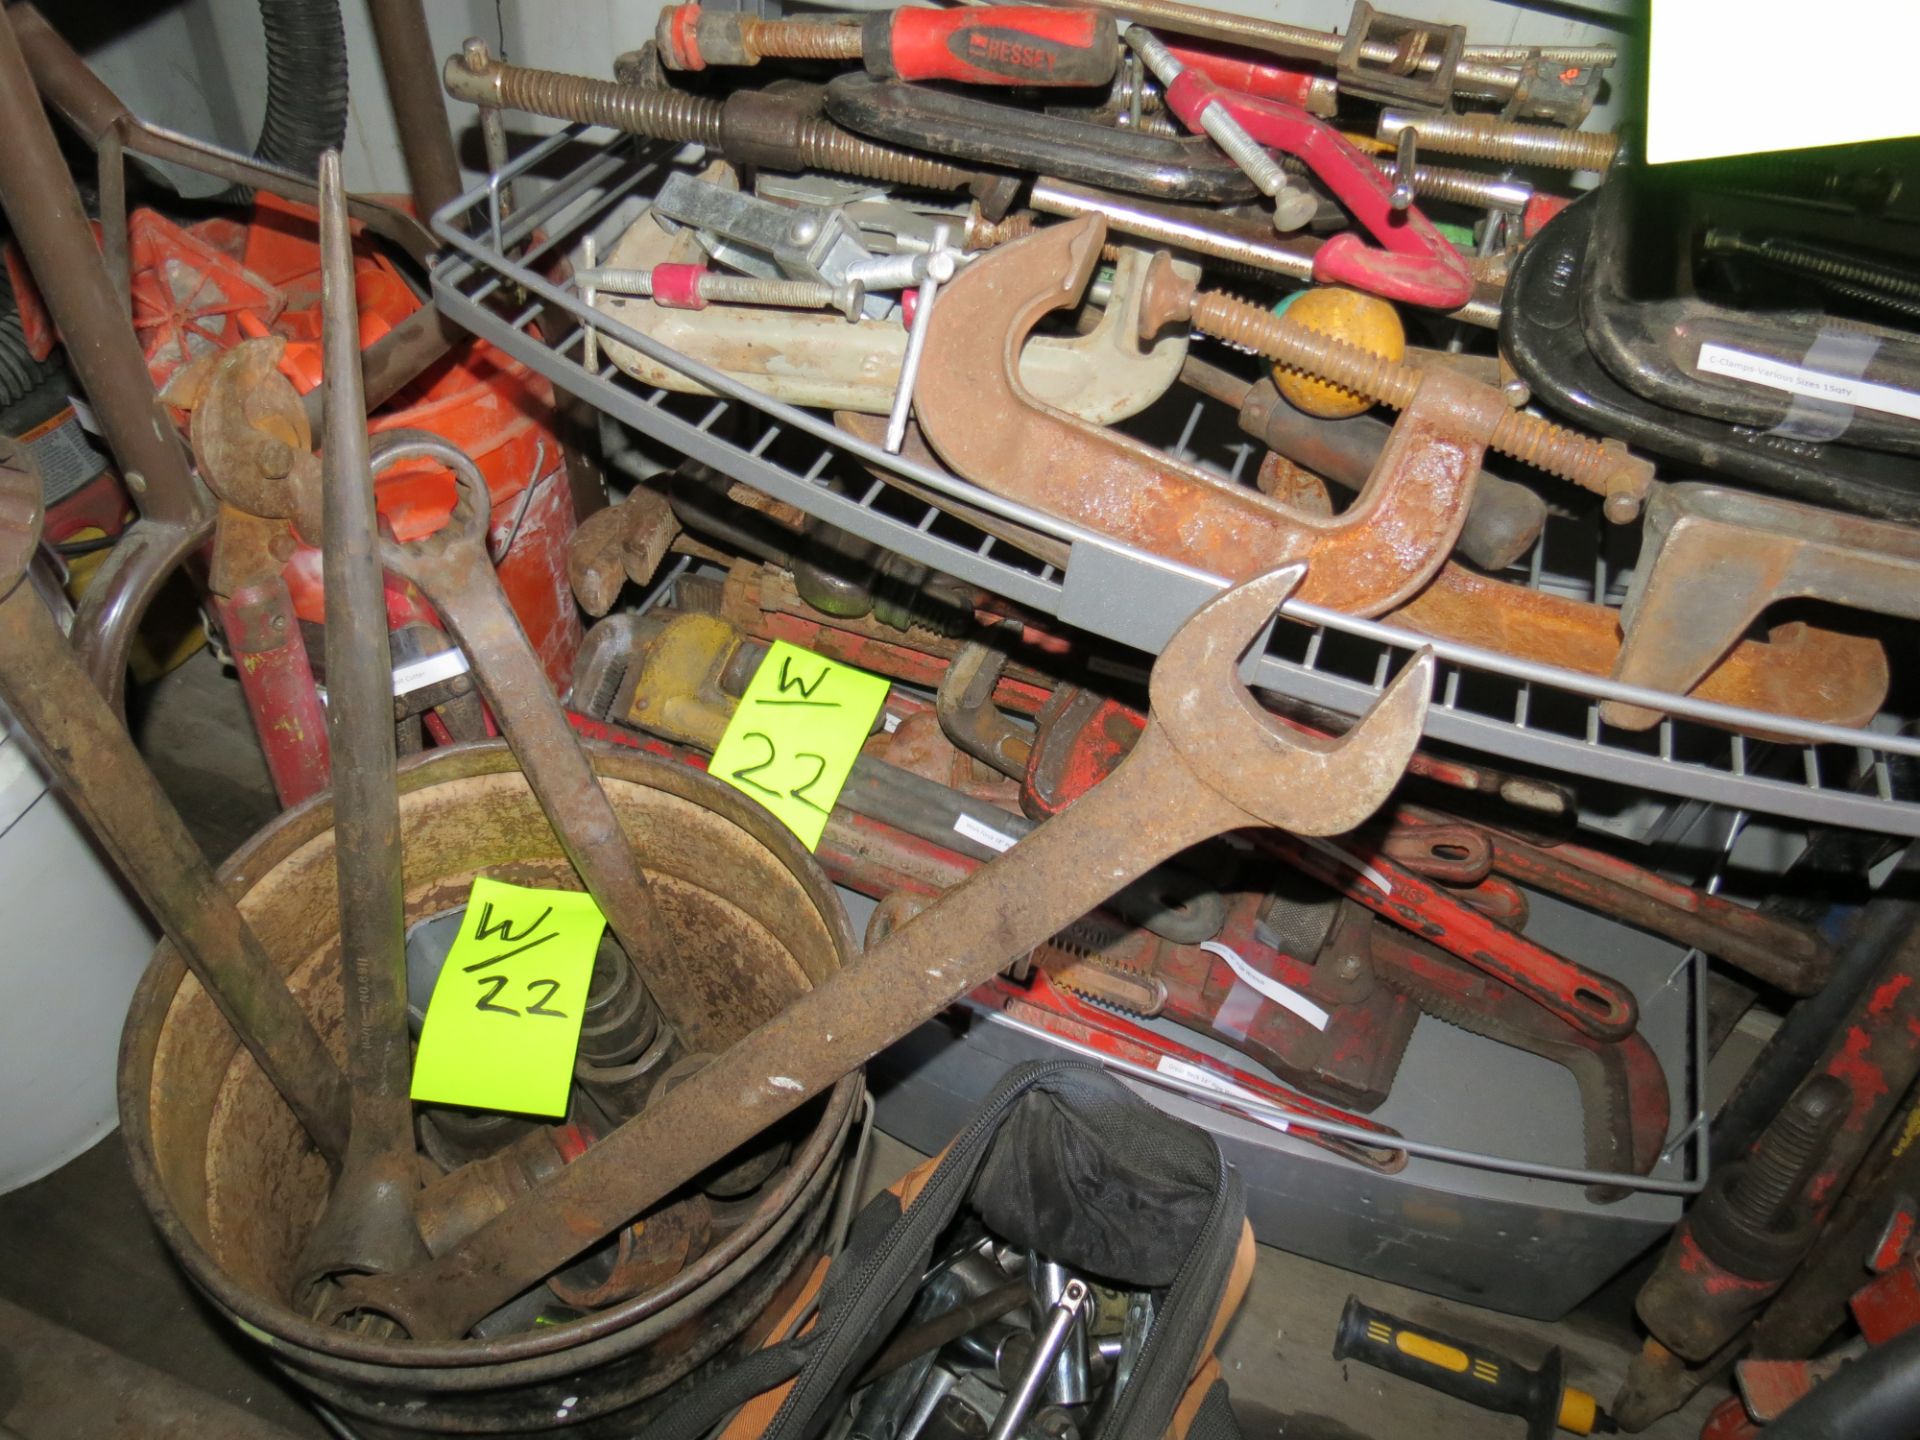 LOT ASSORTED TOOLS, HEAVY DUTY MACHINE WRENCHES, C-CLAMPS, HAMMERS, MALLETS, SCRAPERS & SAW BLADES - Image 3 of 5